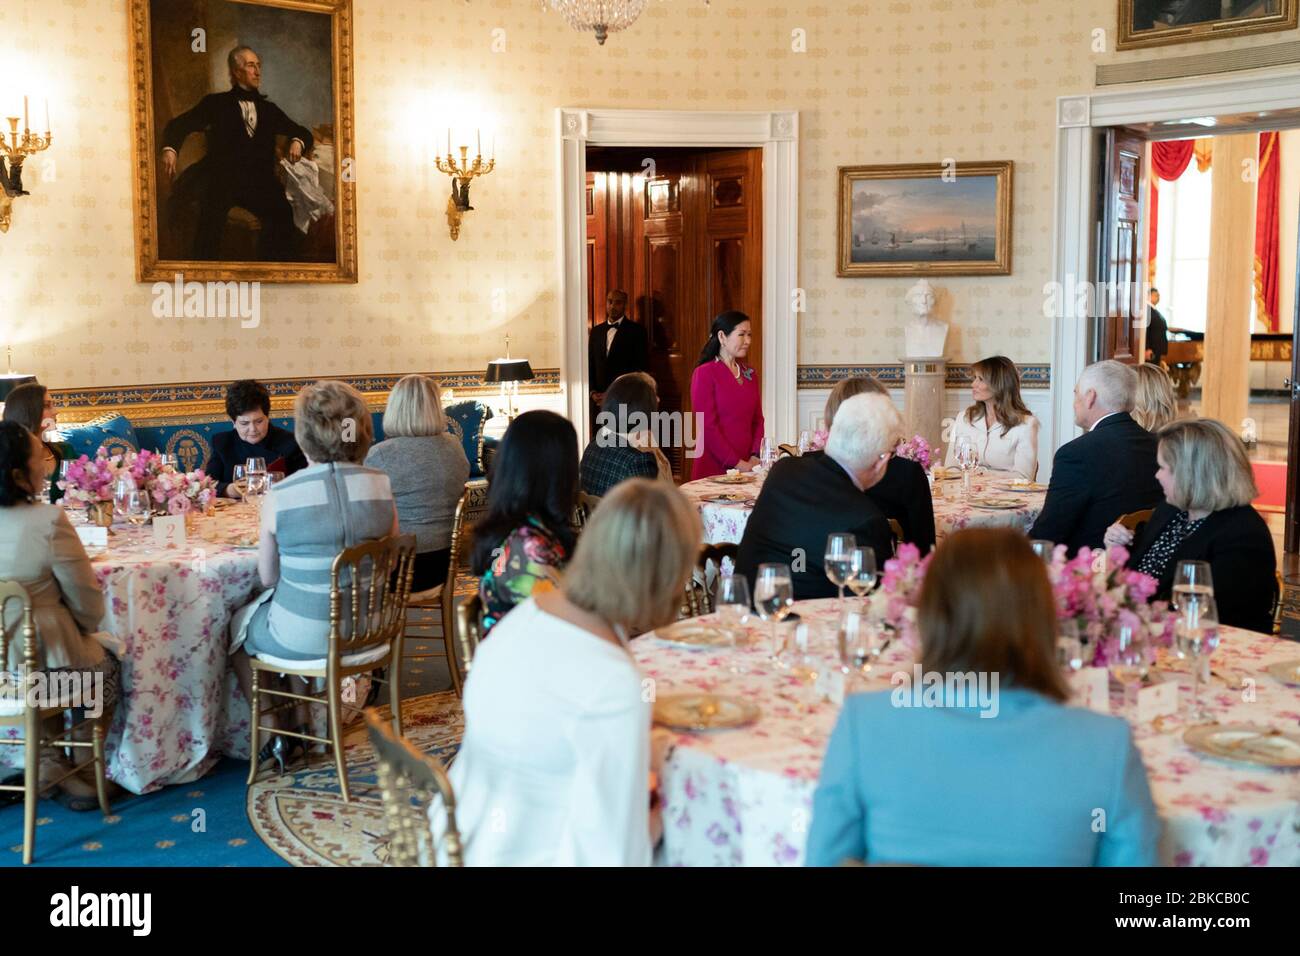 First Lady Melania Trump listens as Mrs. Yumi Hogan, wife of Maryland Governor Larry Hogan and the Chair of the Spouses Leadership Committee, speaks during a Luncheon for Governors’ Spouses Monday, Feb. 10, 2020, in the Blue Room of the White House. President Trump and First Lady Melania Trump at the Governor's Ball Stock Photo